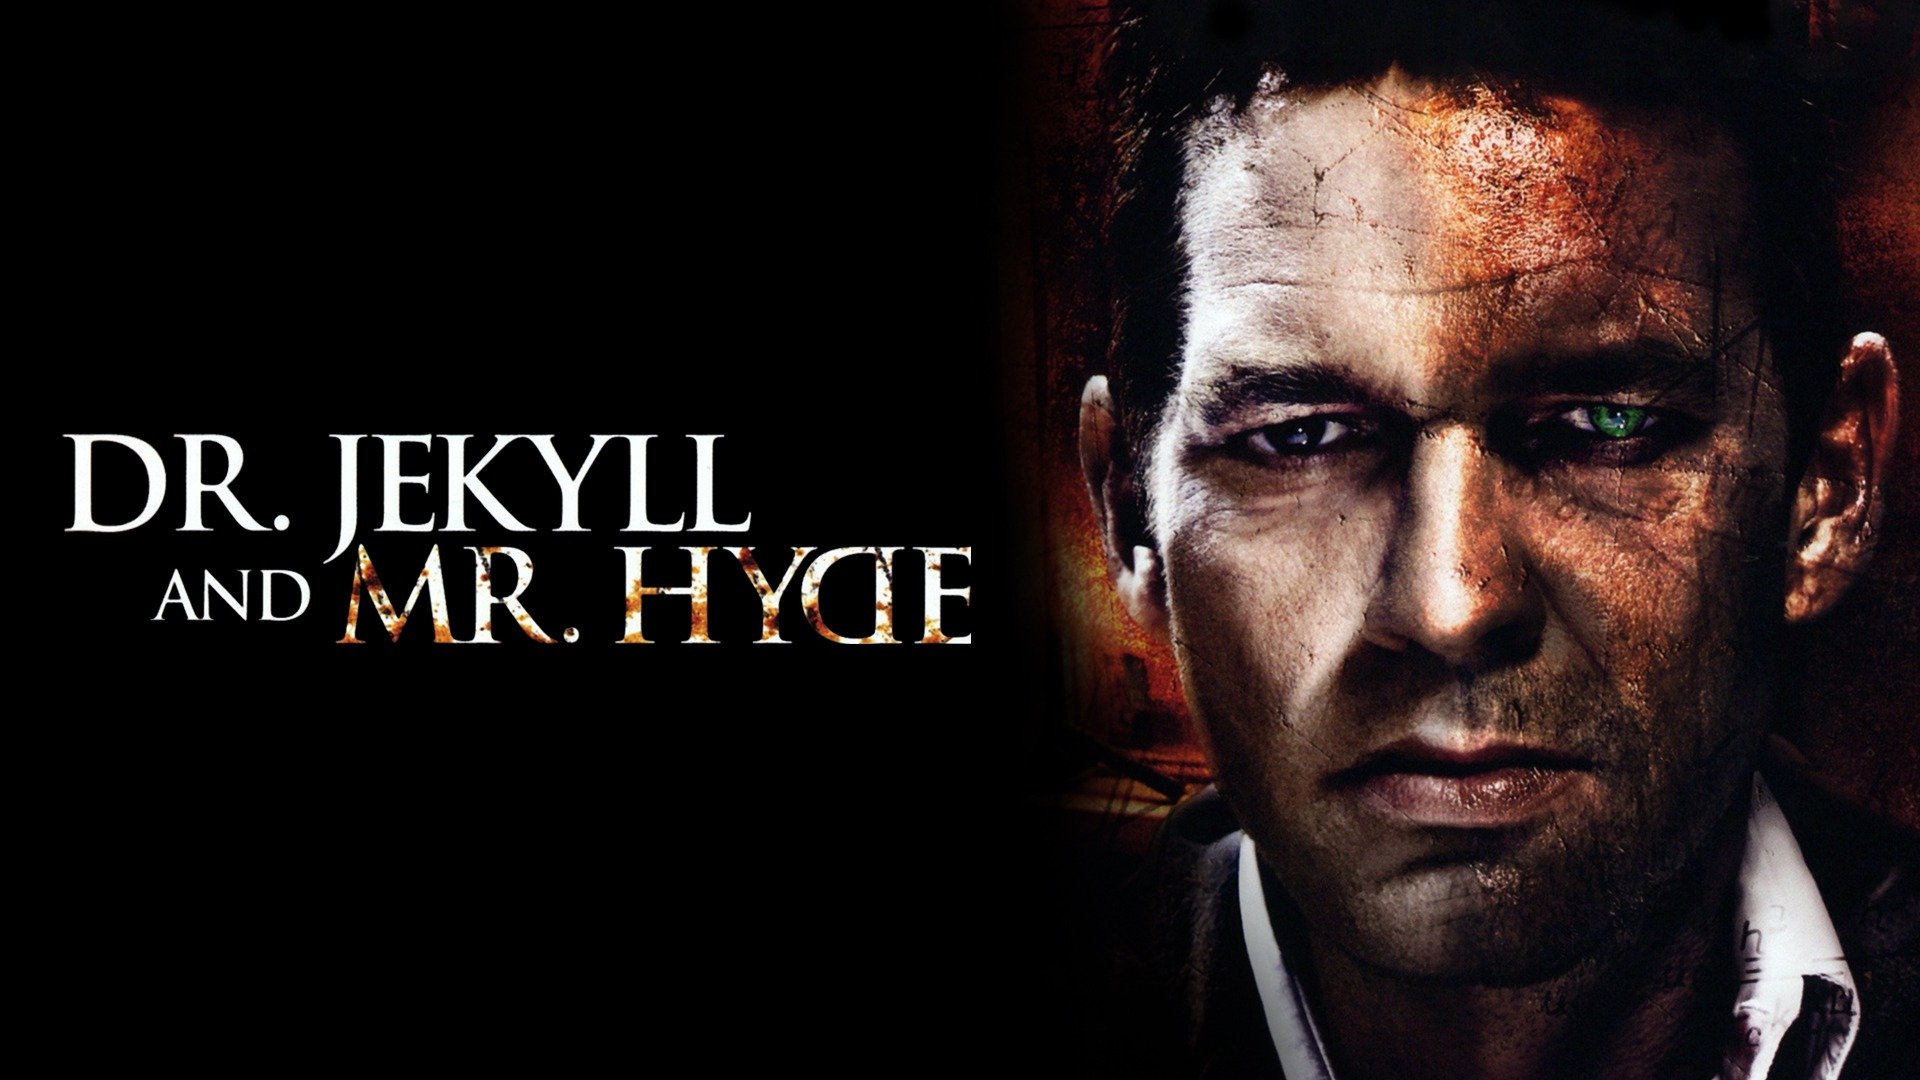 49-facts-about-the-movie-dr-jekyll-and-mr-hyde